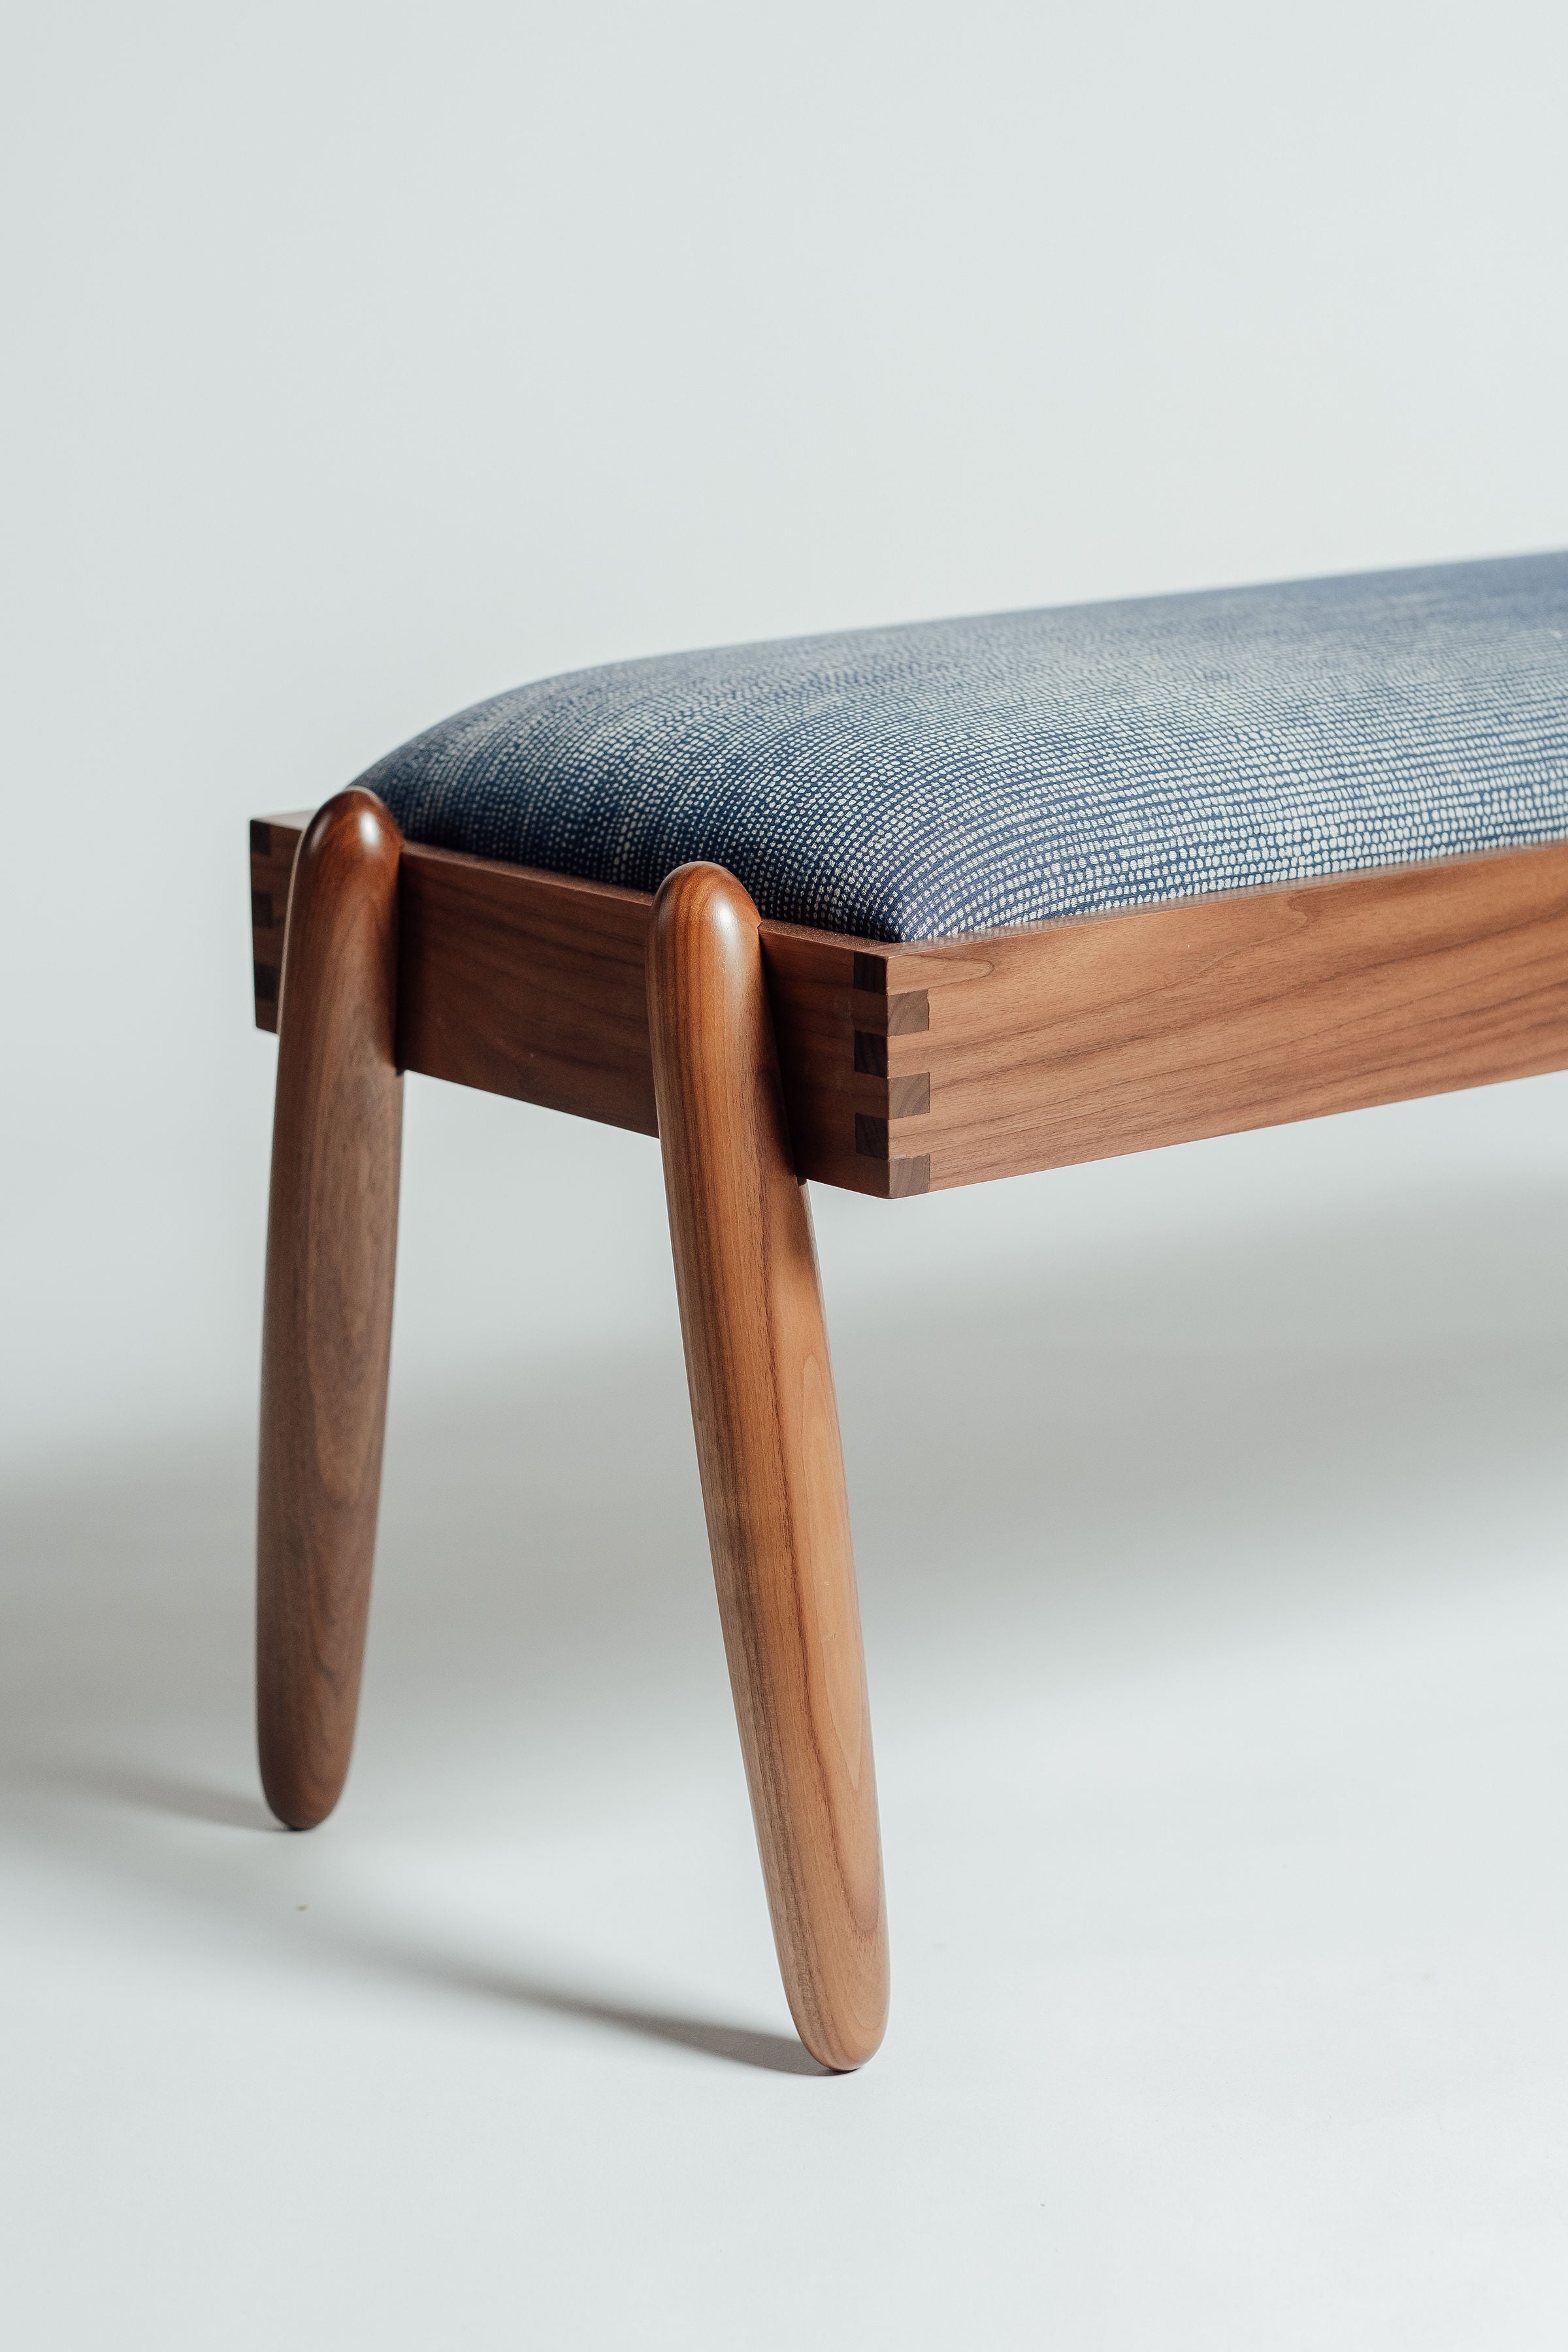 Solomon midcentury modern upholstered walnut wood bench handcrafted by Hunt & Noyer in Michigan